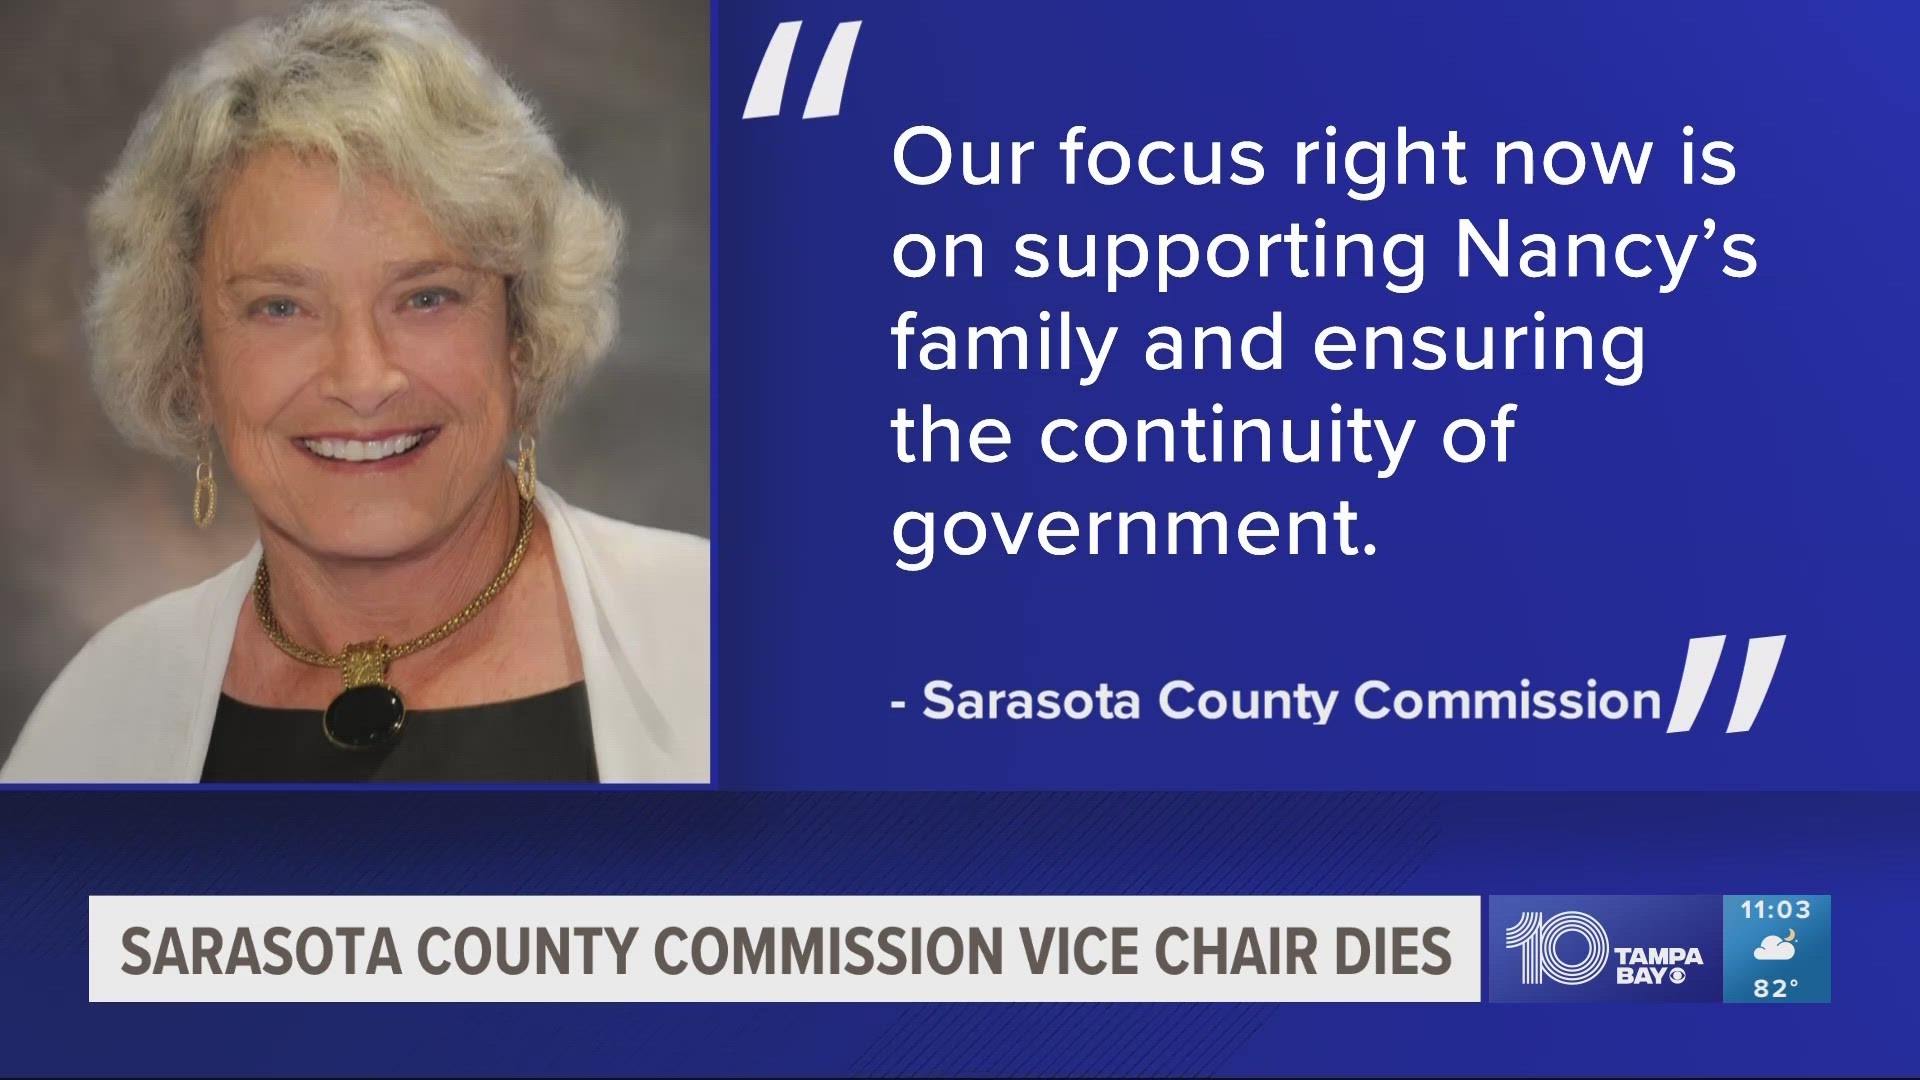 Nancy Detert was first elected to the Sarasota County Commission in 2016 and was re-elected in 2020 before becoming vice chair.